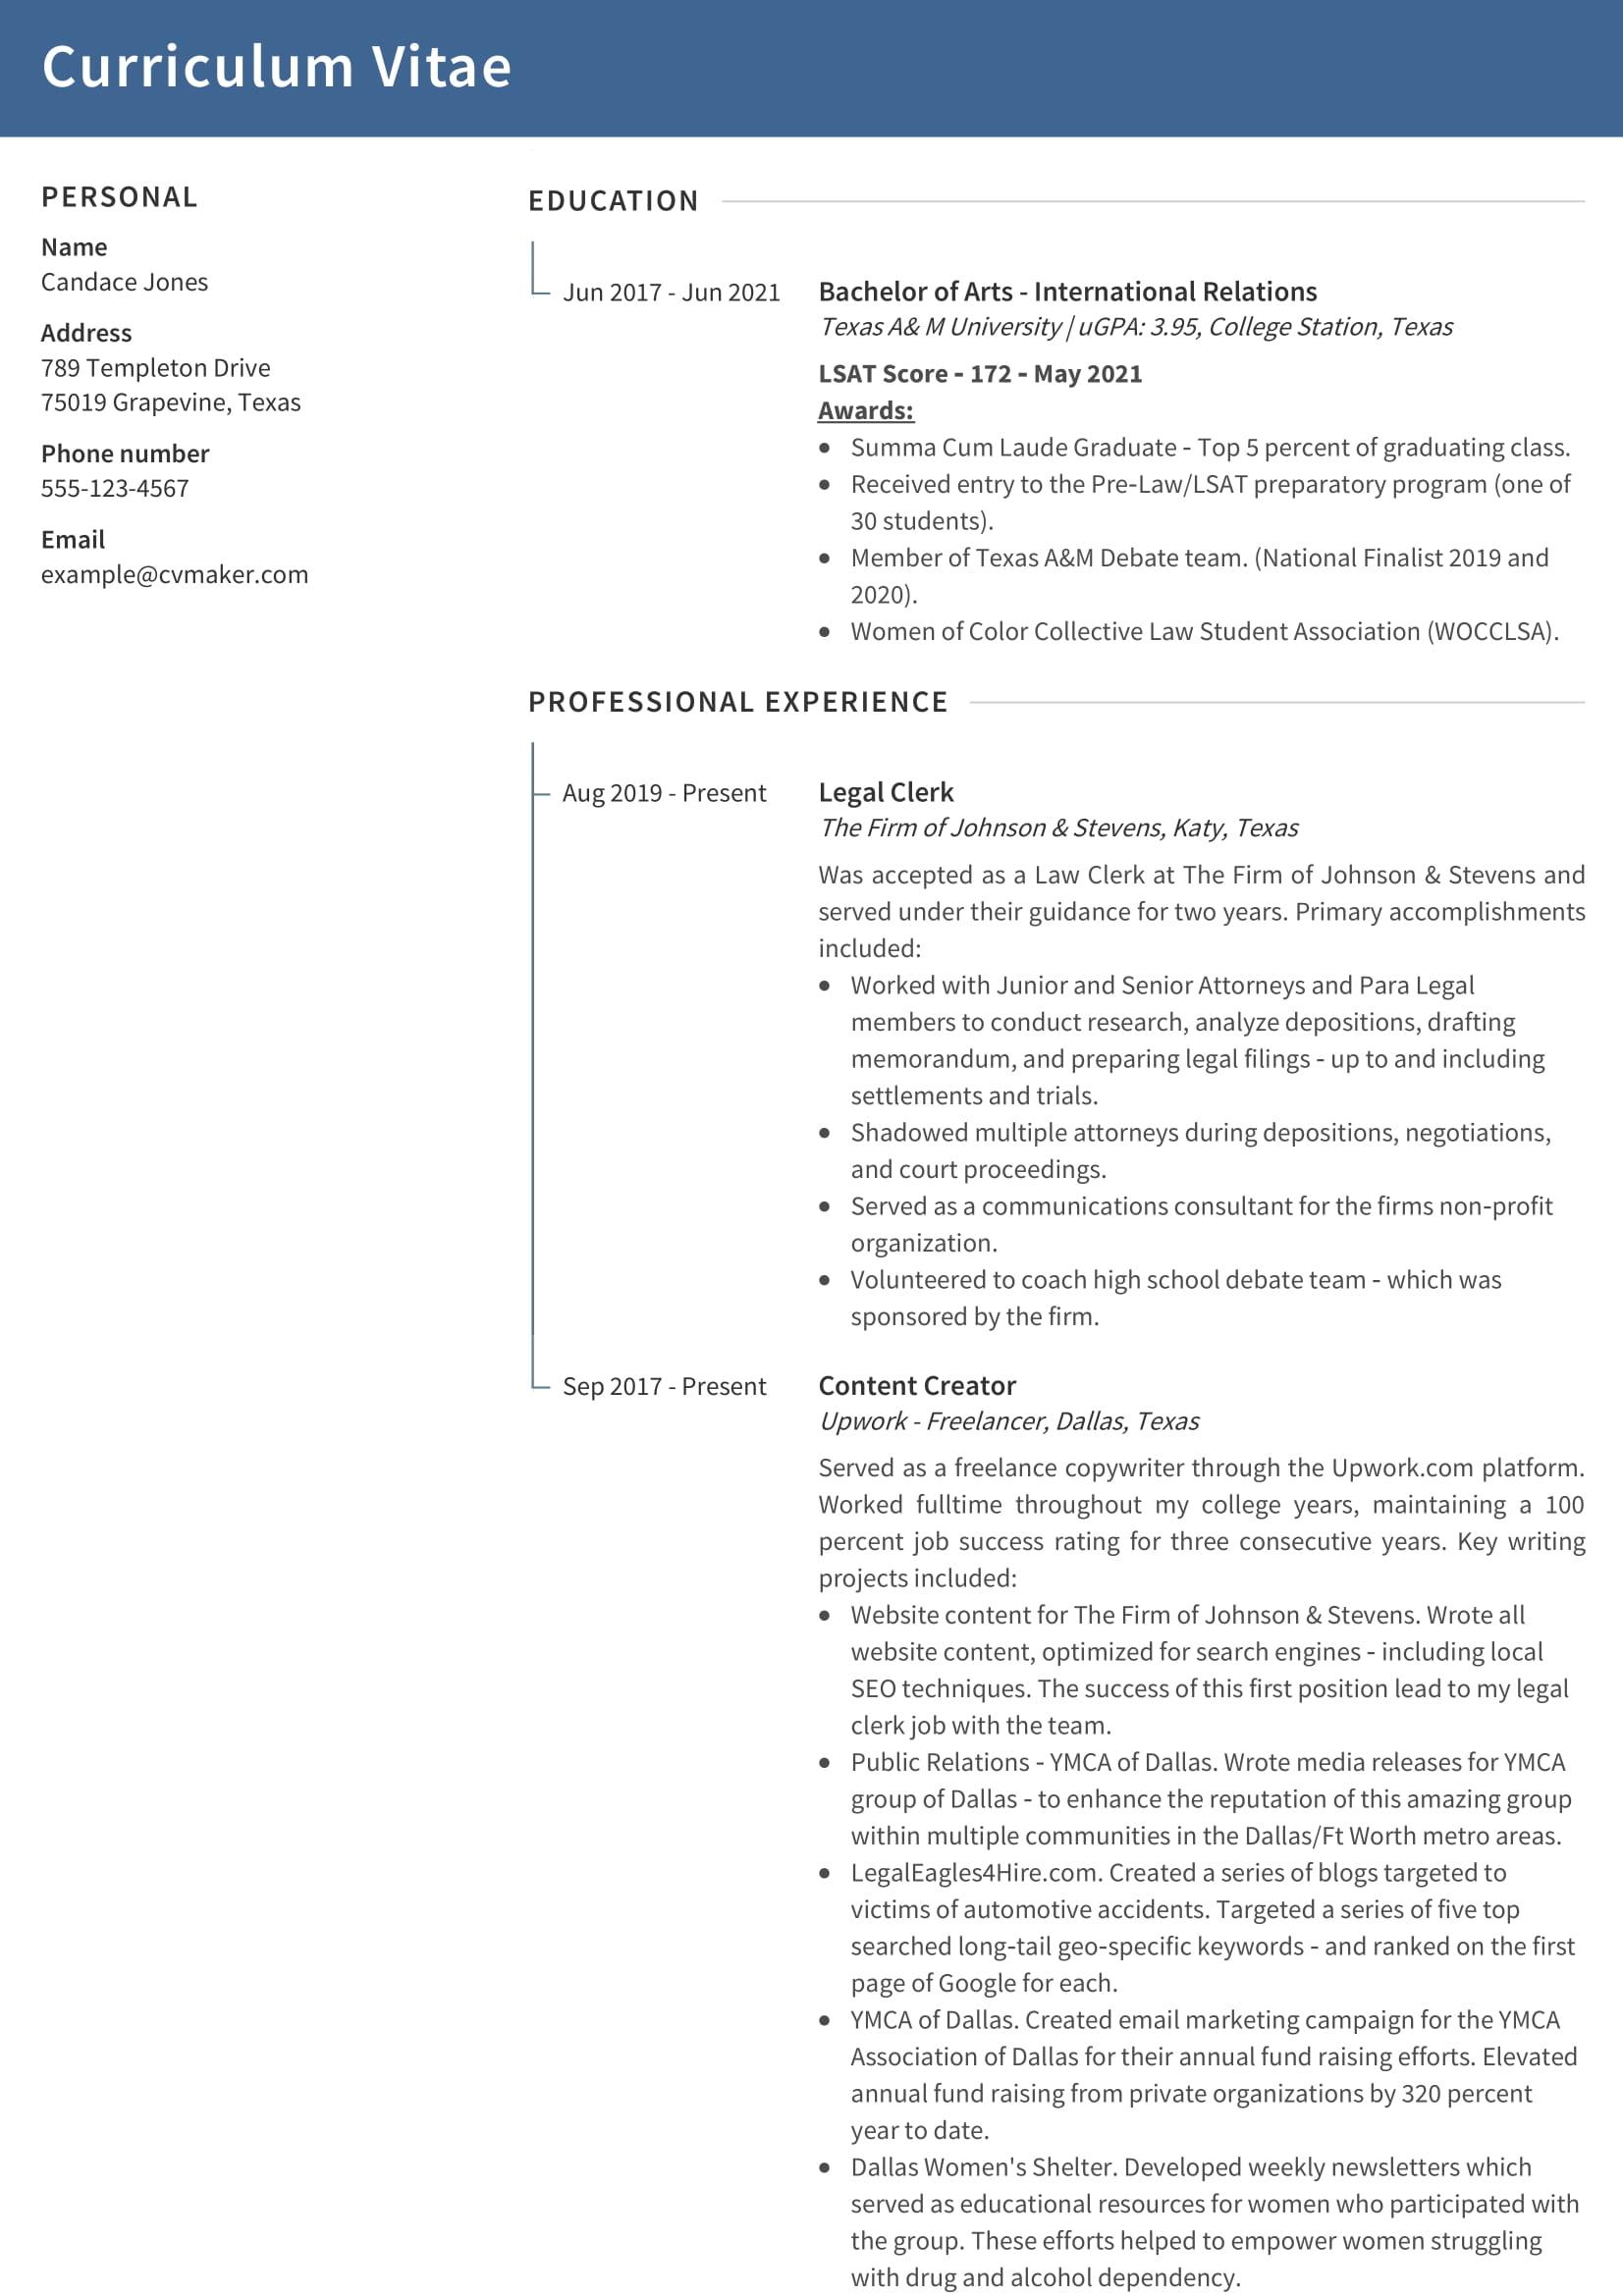 example resume for law school application